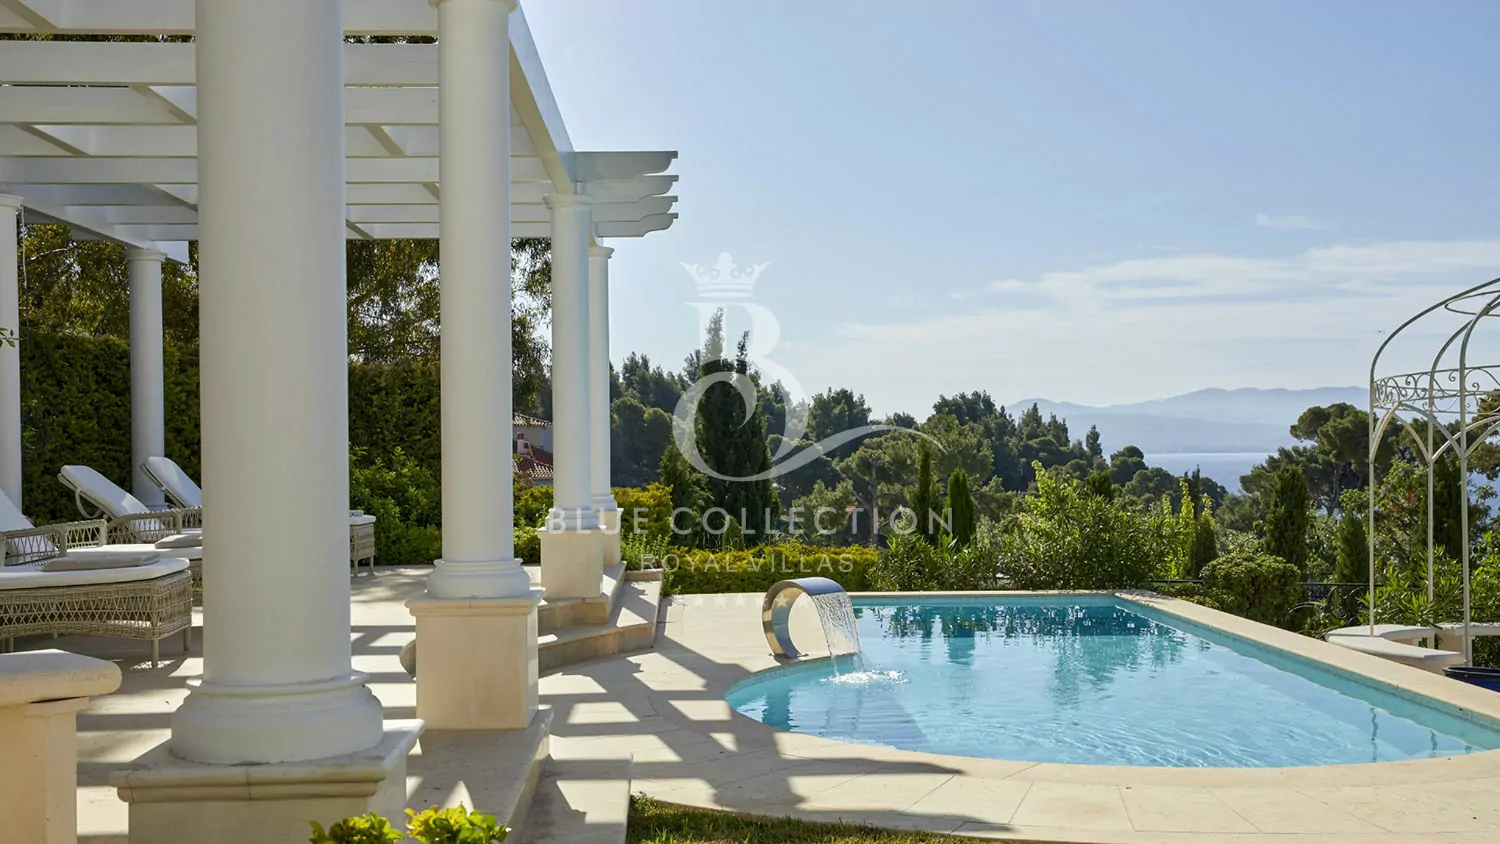 Luxury Villa for Rent in Chalkidiki – Greece | Private Swimming Pool & Jacuzzi | Amazing Sea View | Sleeps 8 | 4 Bedrooms | 3 Bathrooms | REF: 180412705 | CODE: CLD-4